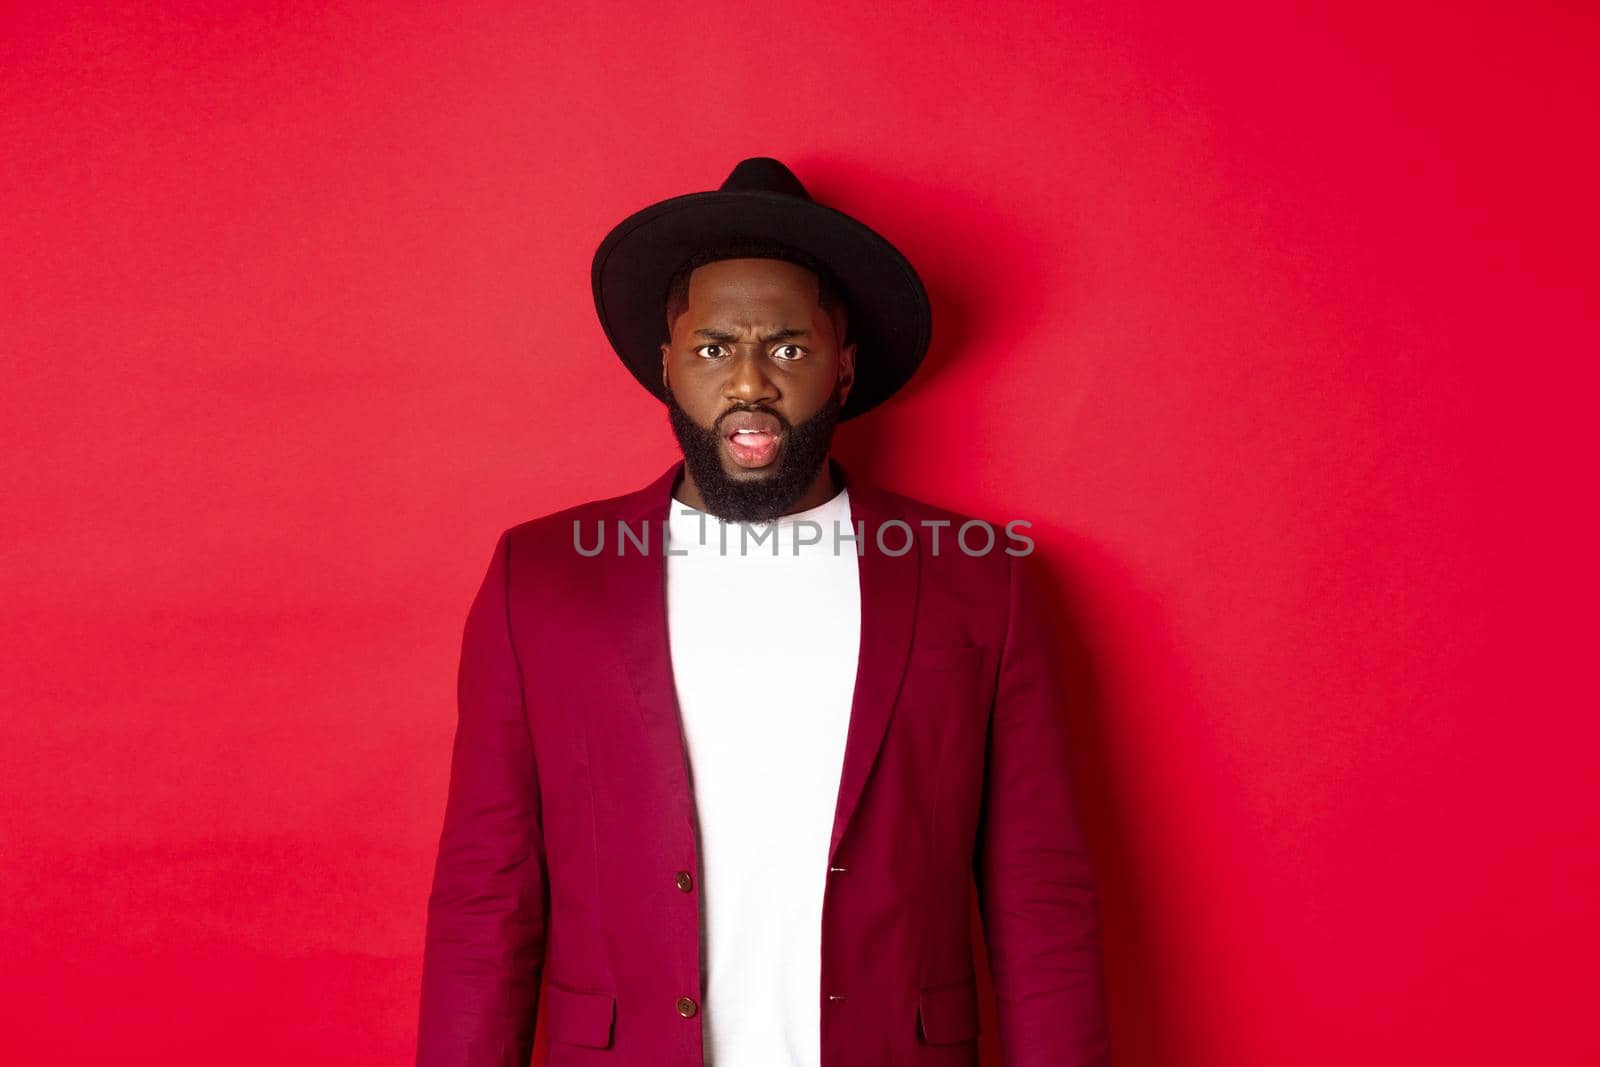 Fashion and party concept. Confused Black man in classy outfit frowning and staring at camera displeased, cant understand, standing over red background.